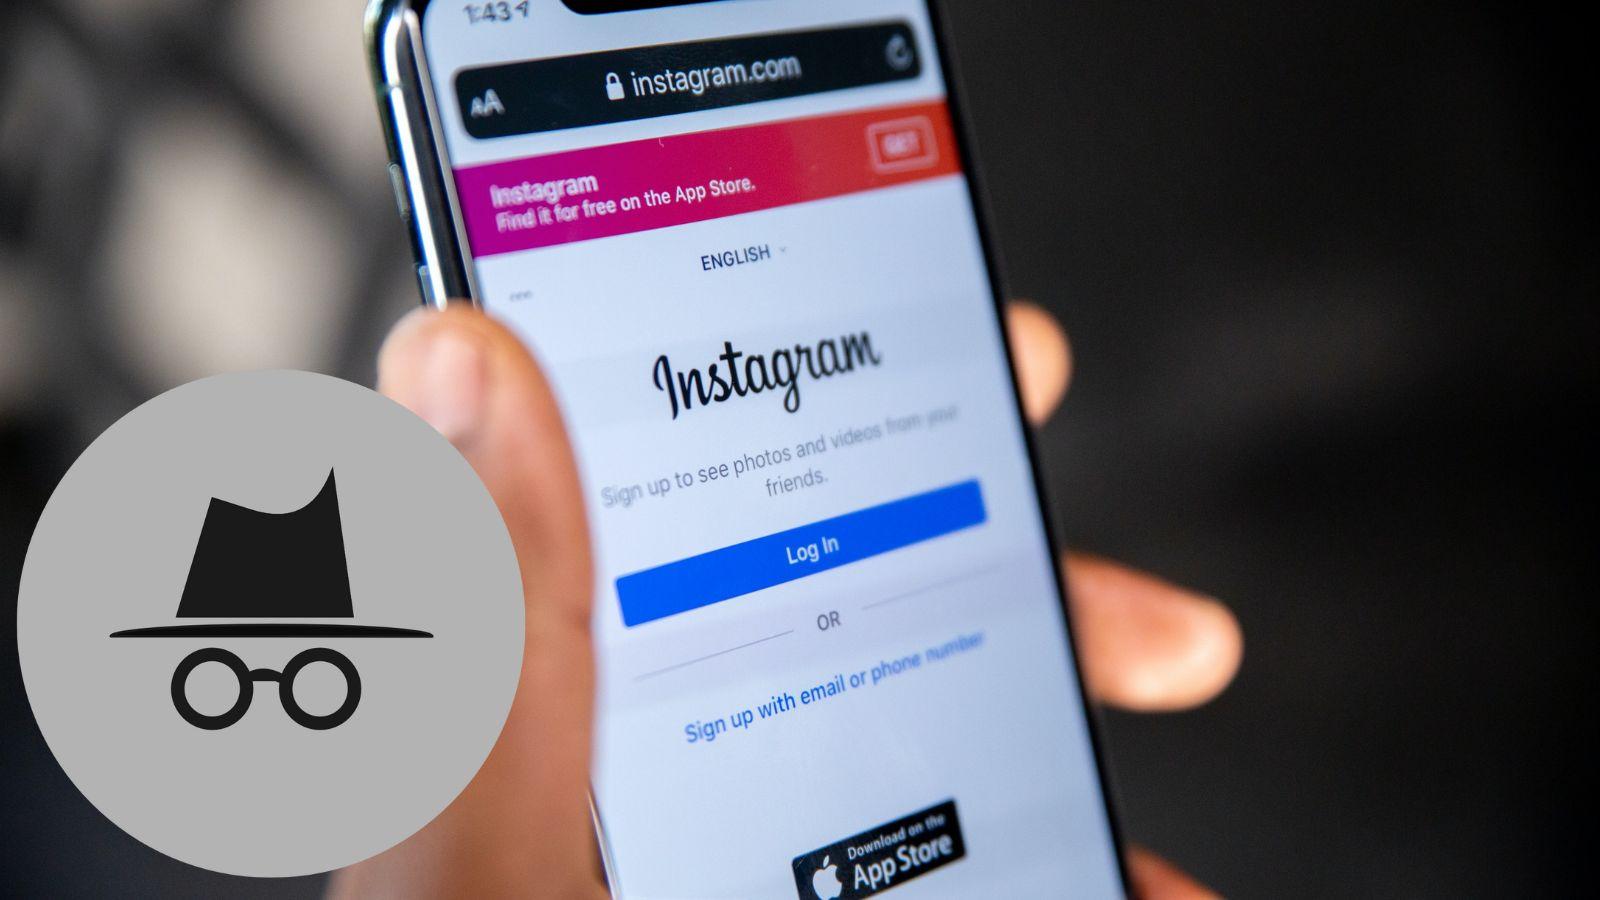 How to watch someone's Instagram Story anonymously